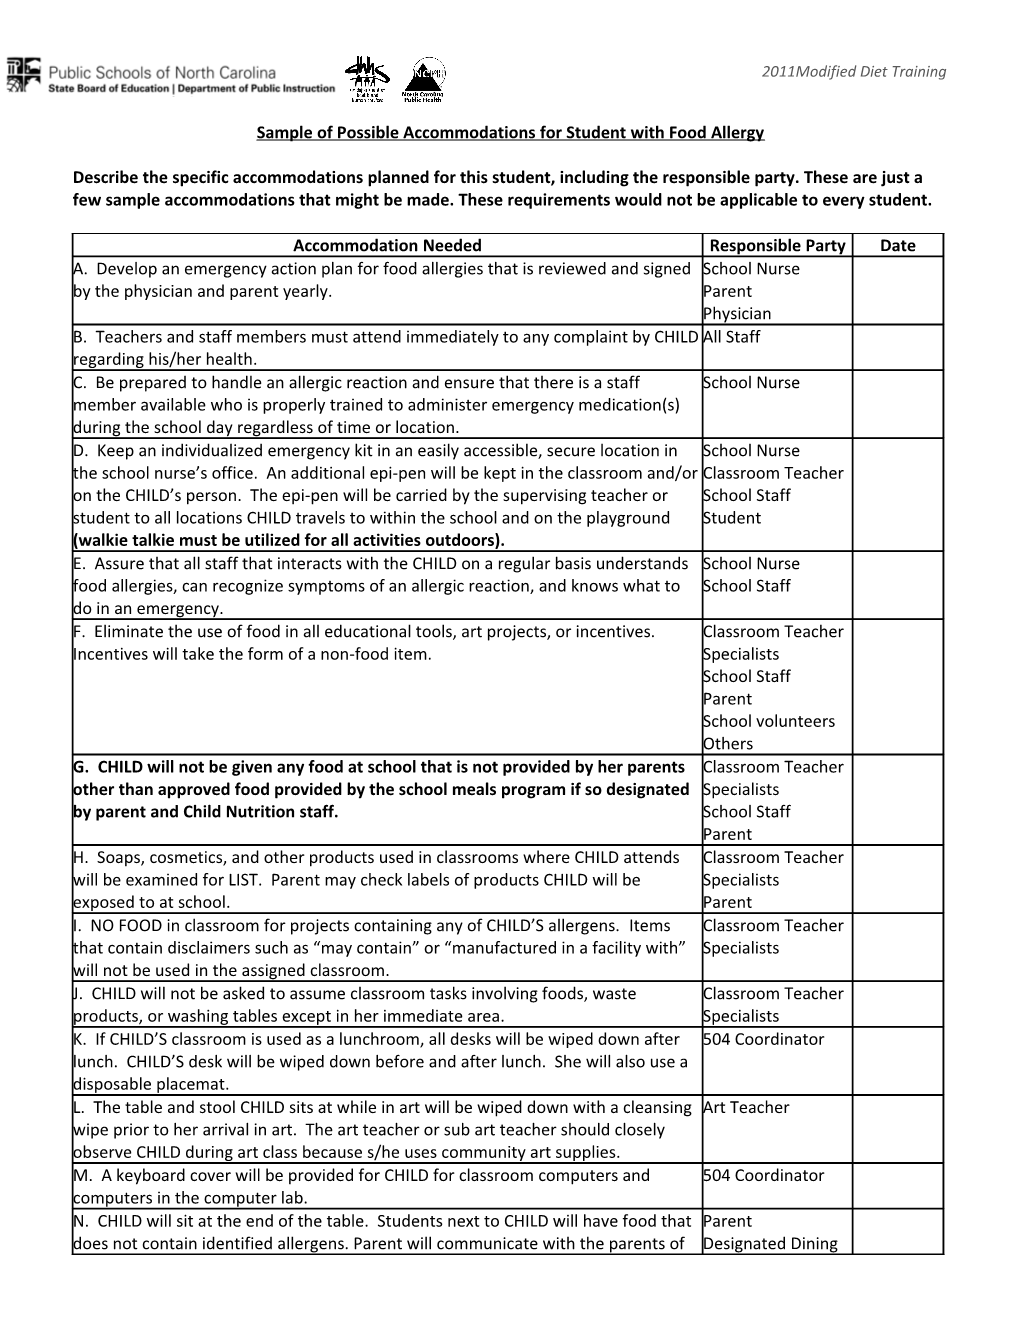 Sample of Suggested Accommodations for Student with Food Allergy